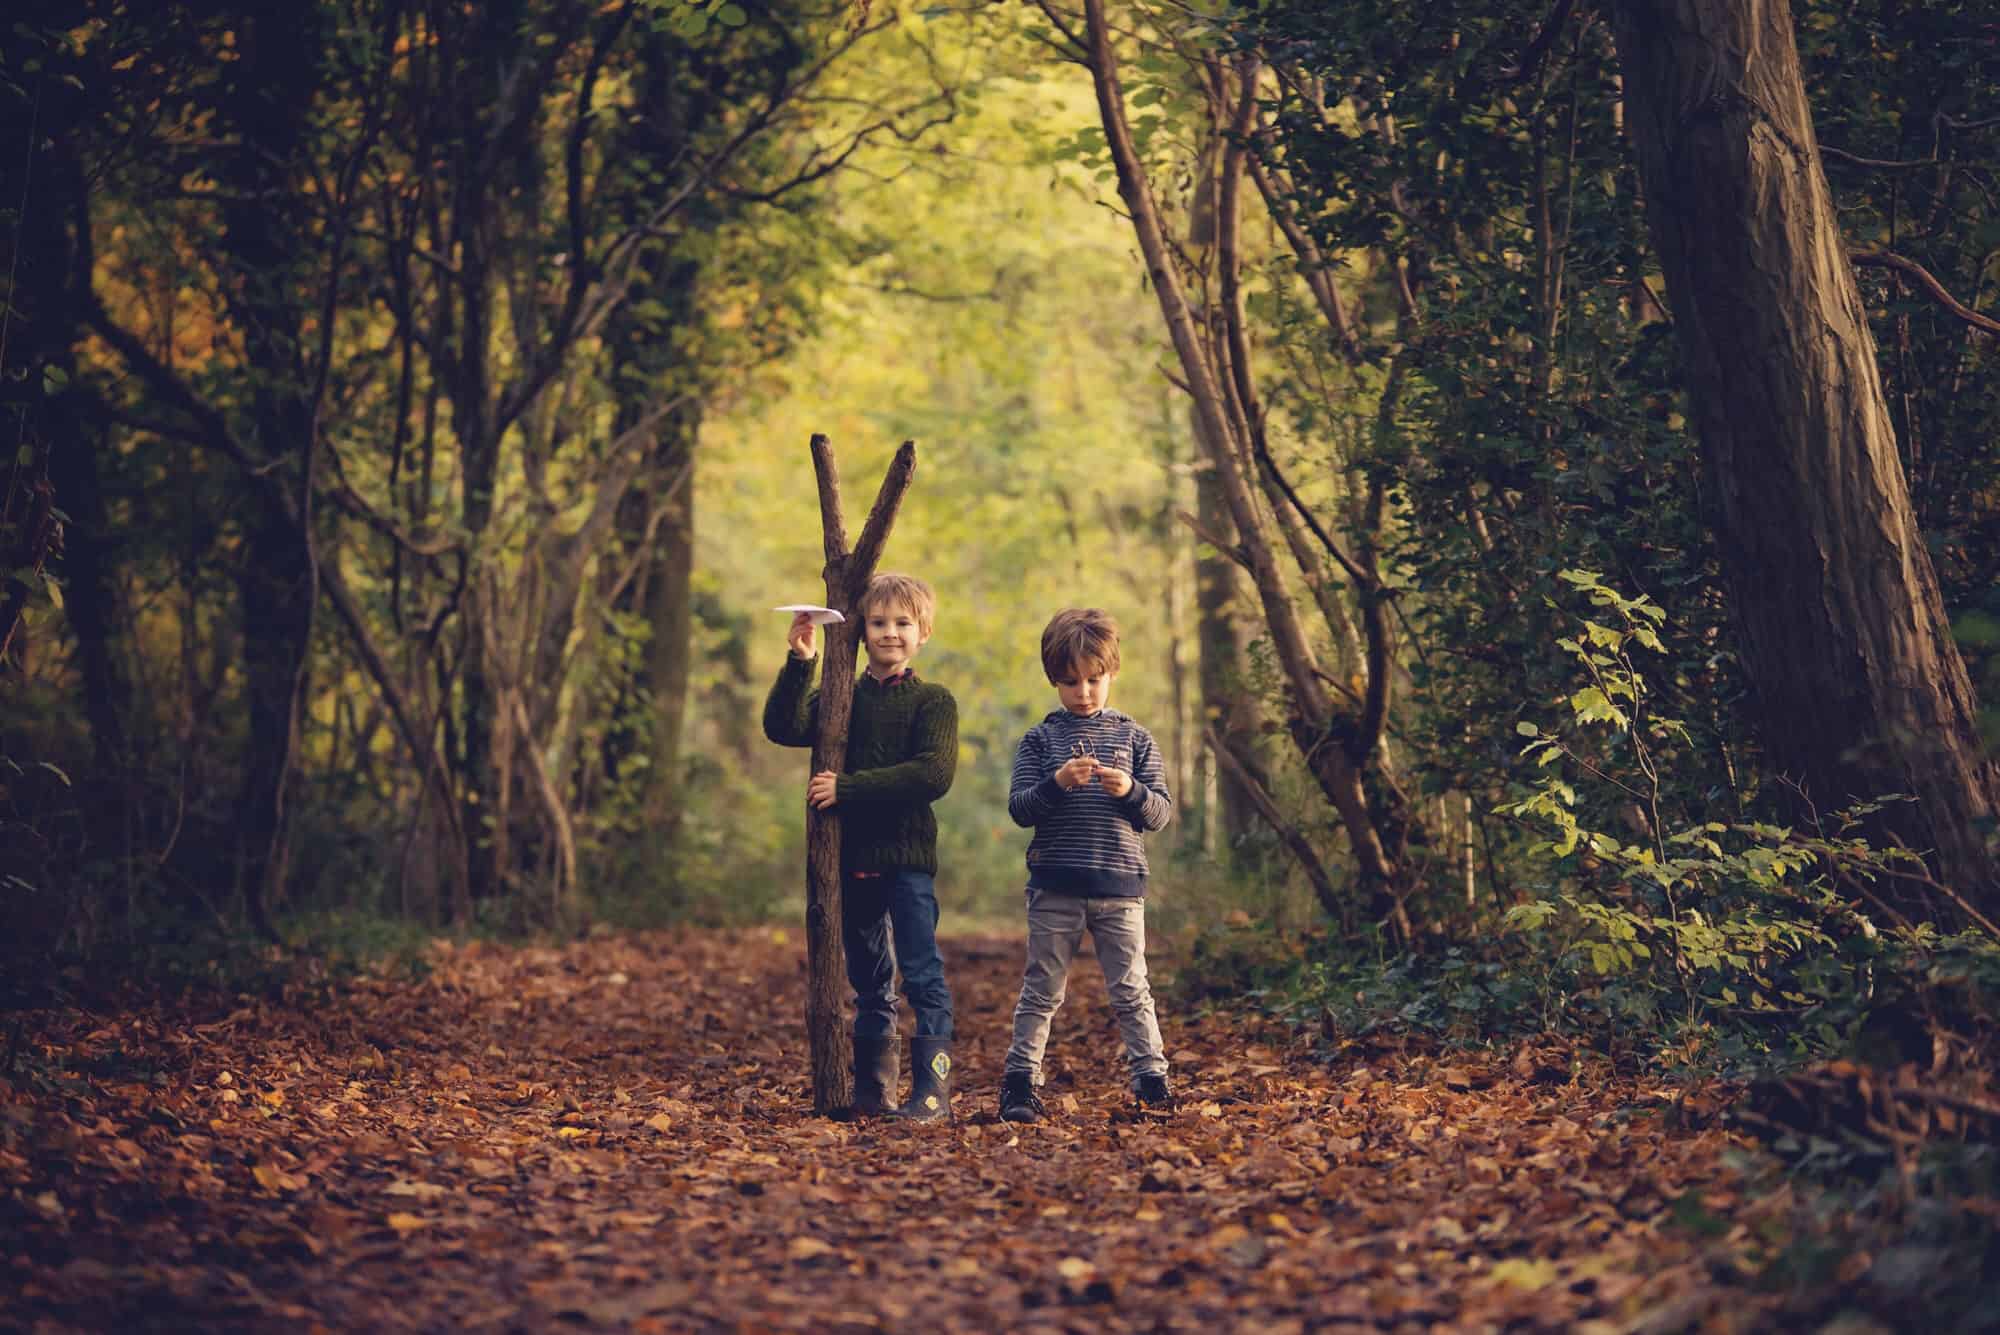 brothers in autumn woods with big stick